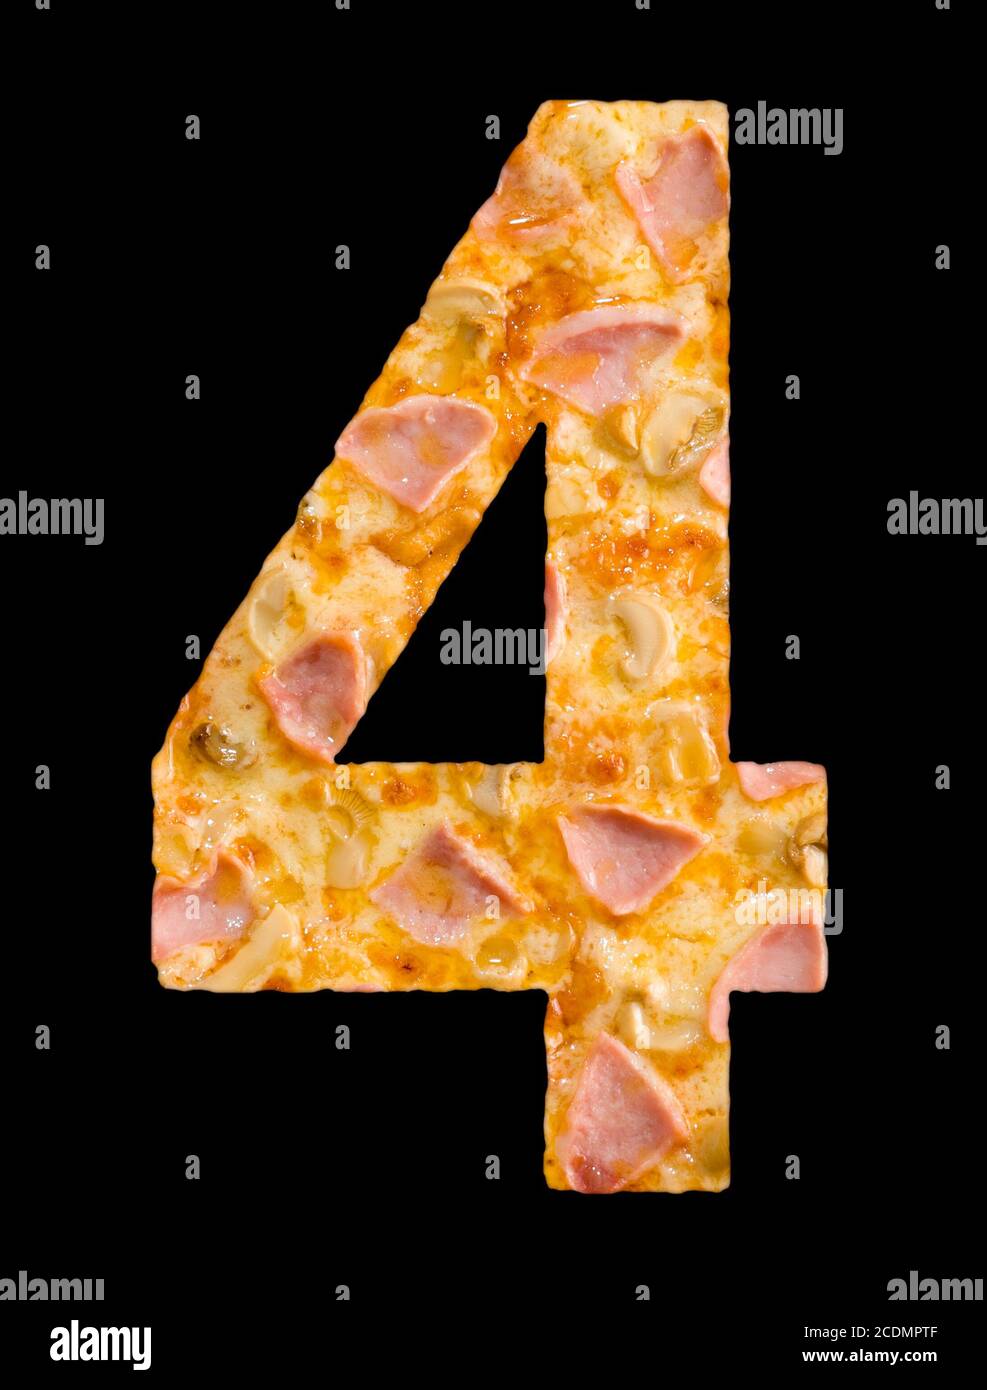 number 4 cut out of pizza Stock Photo